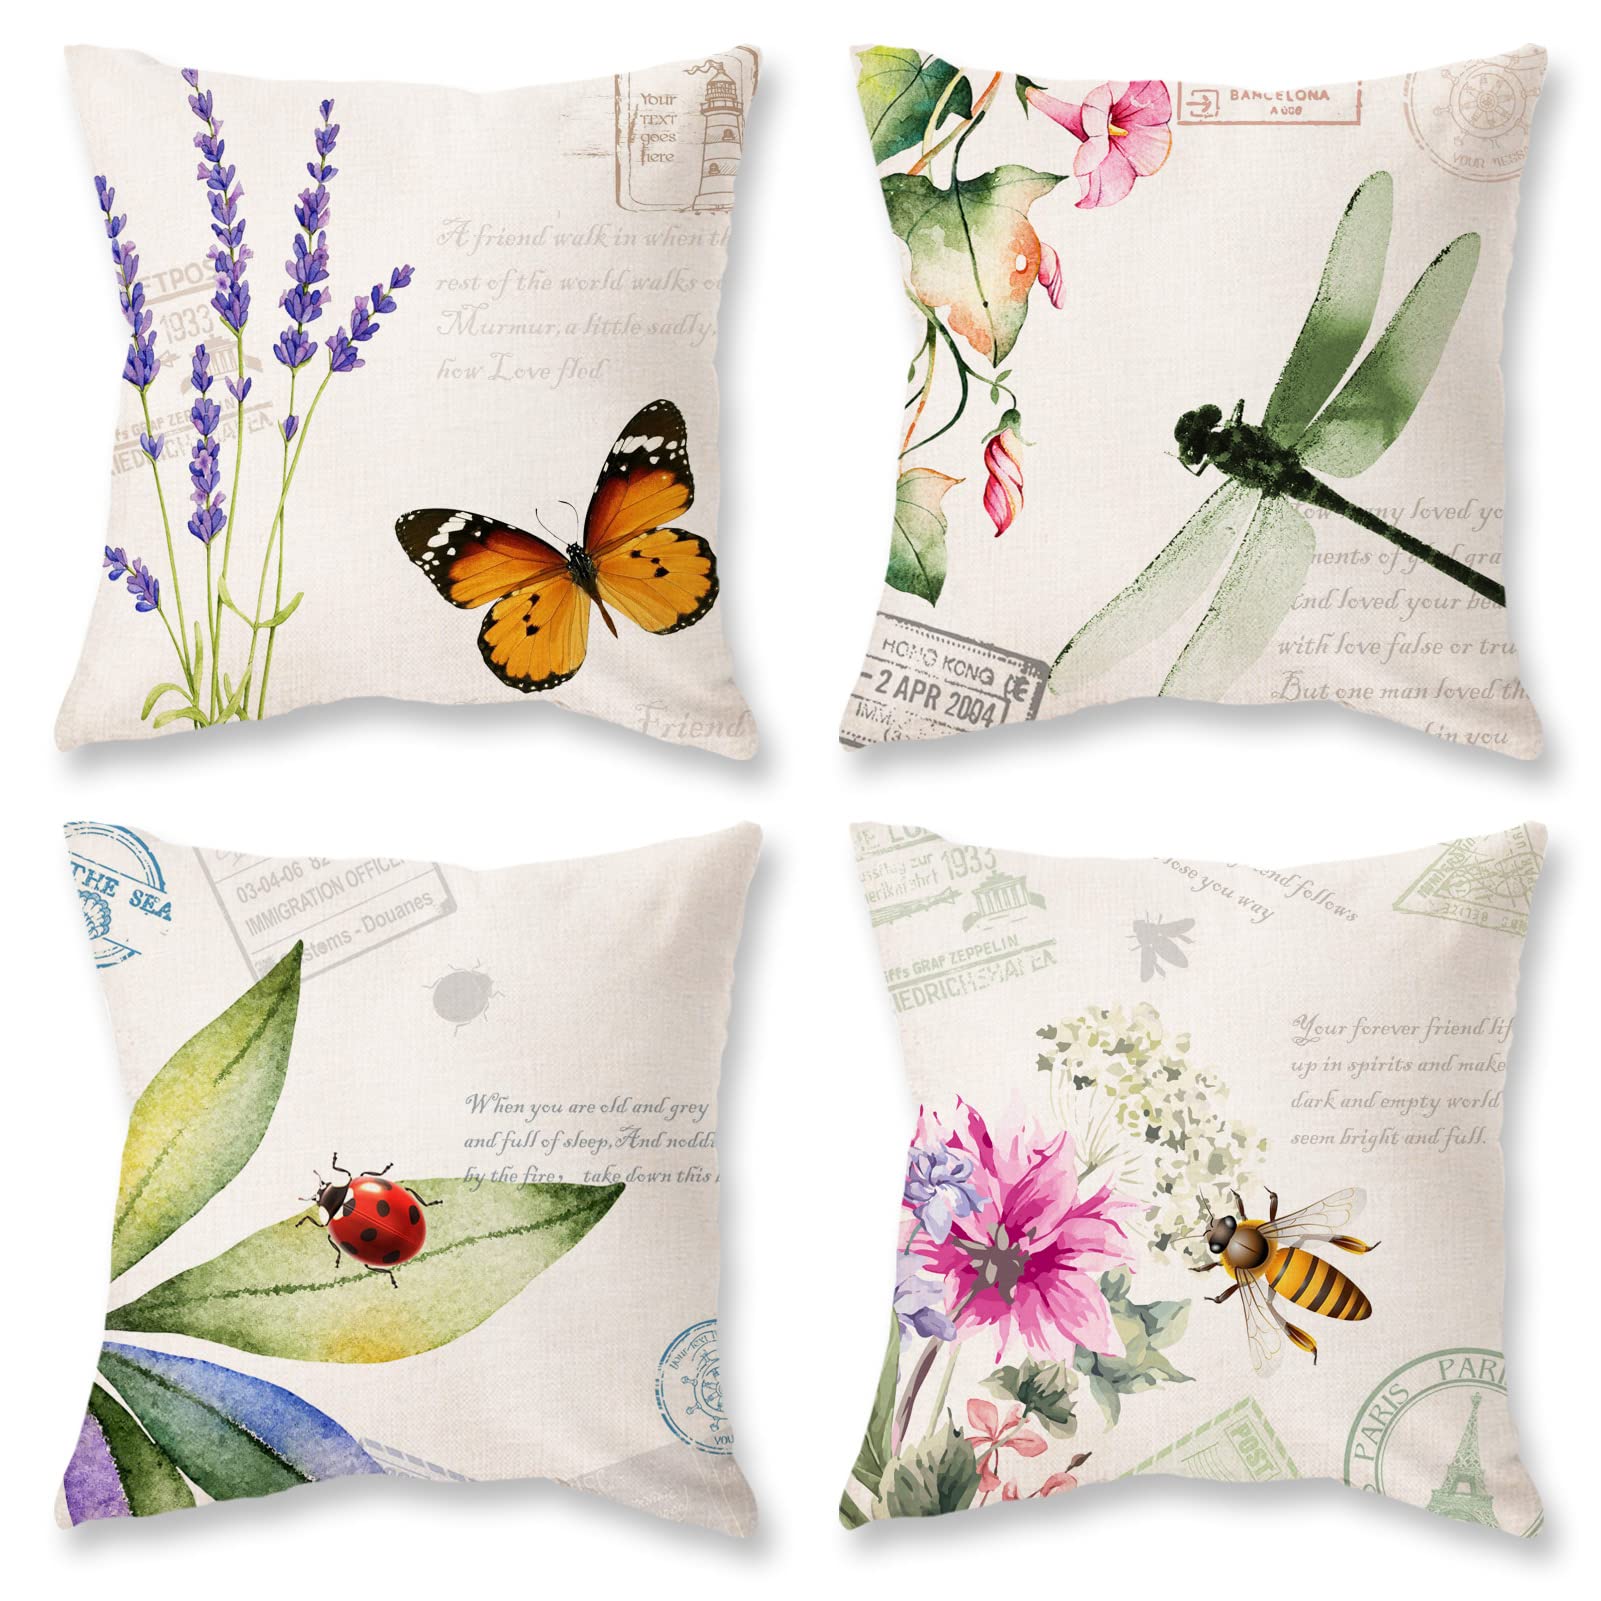 ONWAY Decorative Throw Pillow Covers 16x16 Inches Set of 4 Summer Spring Garden Farmhouse Decor Cushion Cases for Porch Couch So